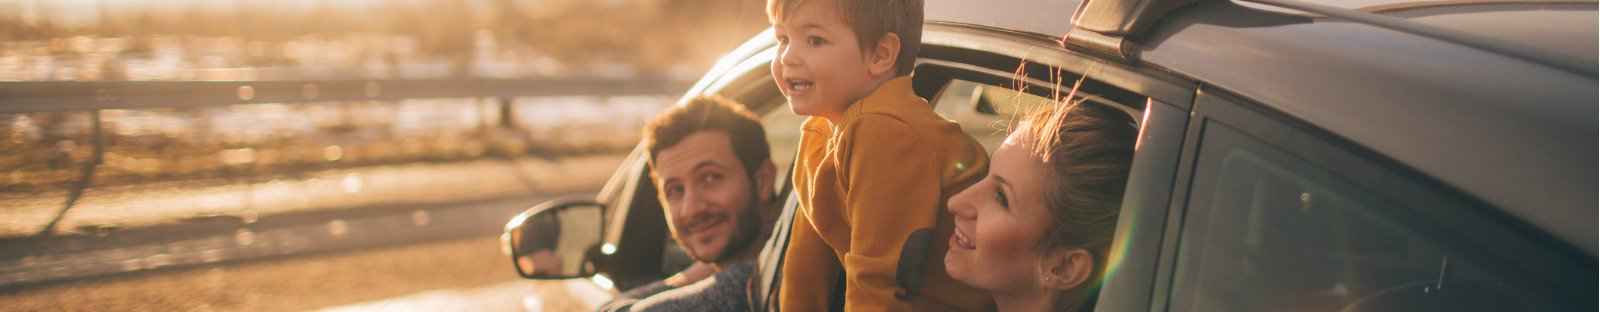 man, woman and young boy looking out of parked car at landscape